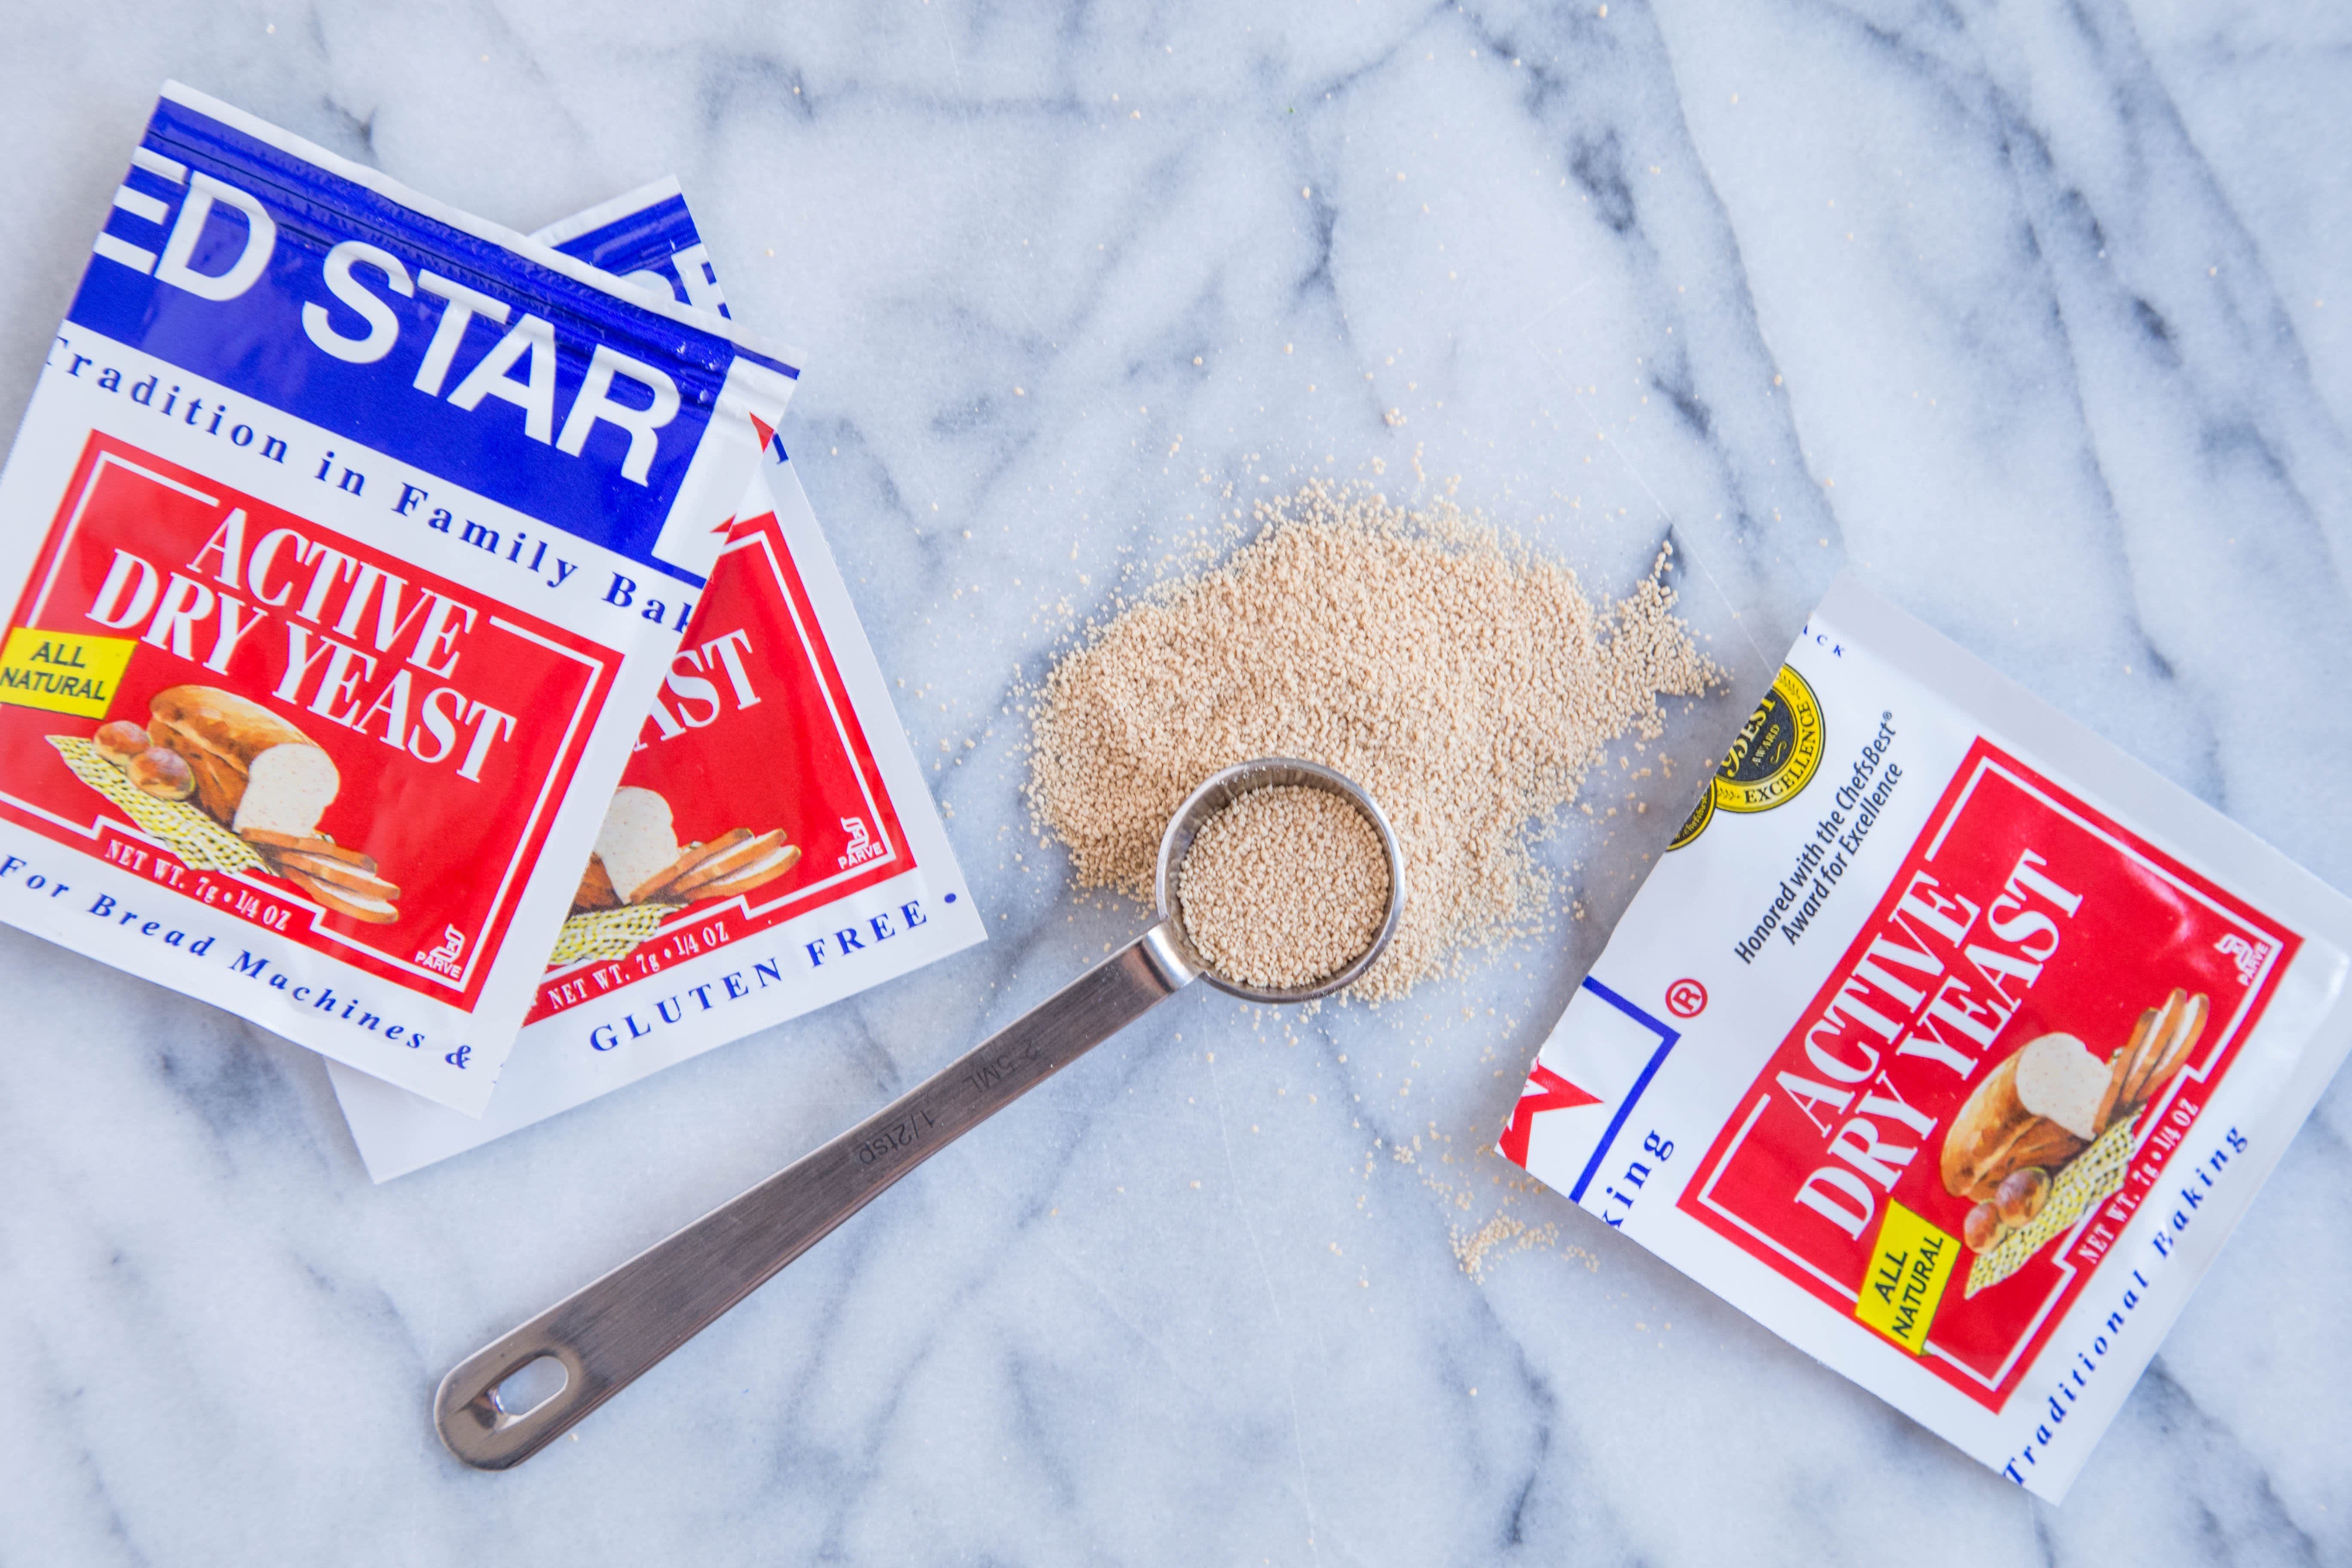 The Best Yeast Substitutes for Baked Goods